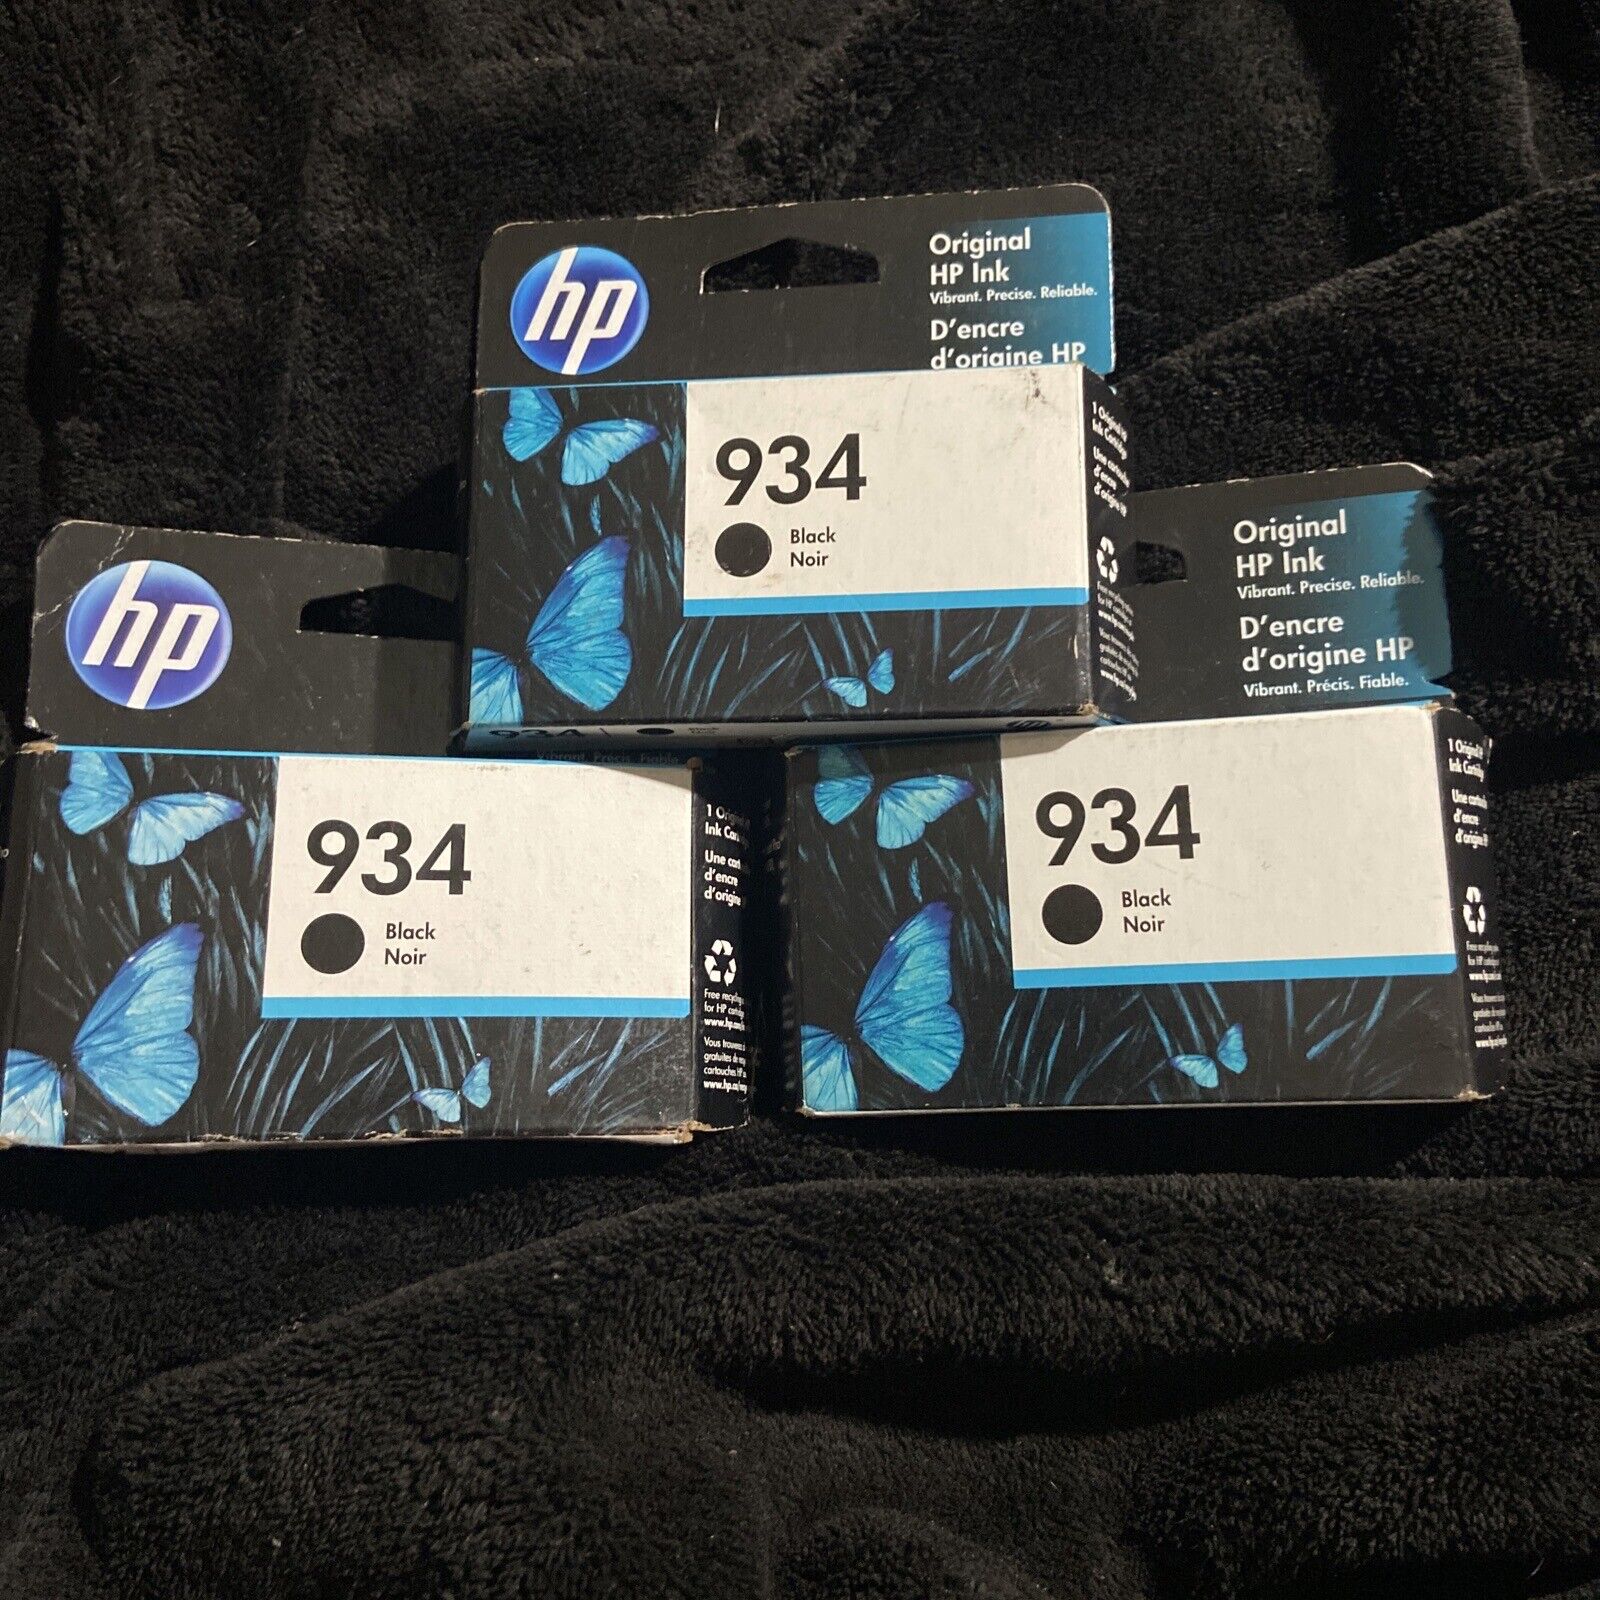 3 New OEM HP 934 Black Ink Cartridges Exp. 2021 -2023 Free Fast Shipping